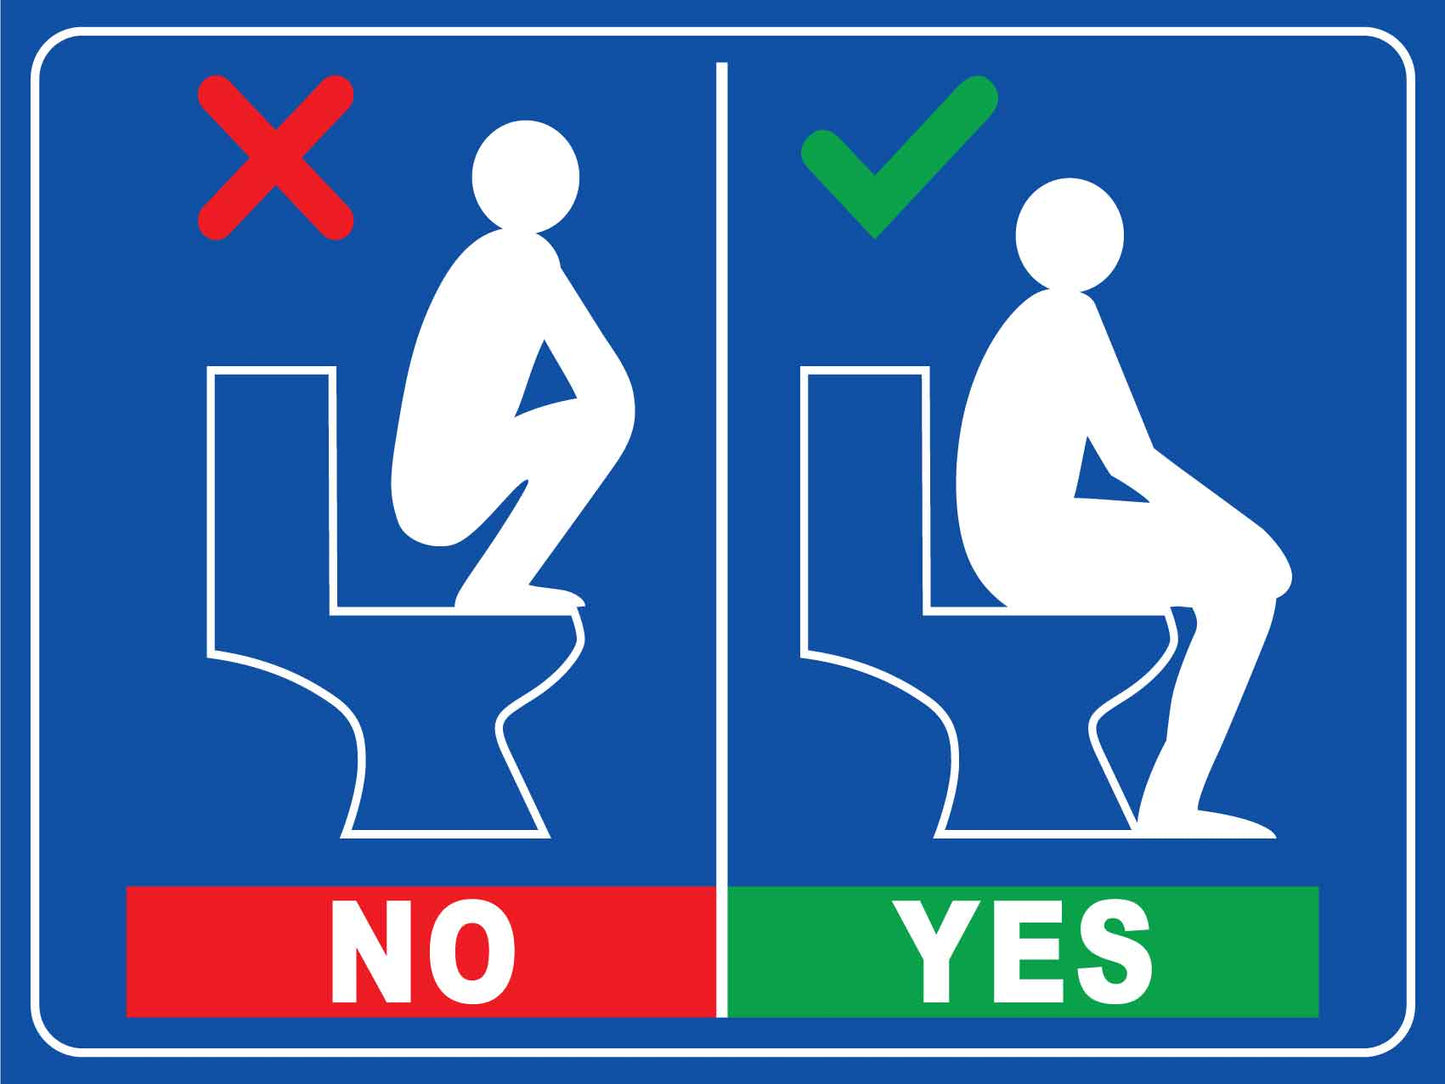 How to Use The Toilet Sign